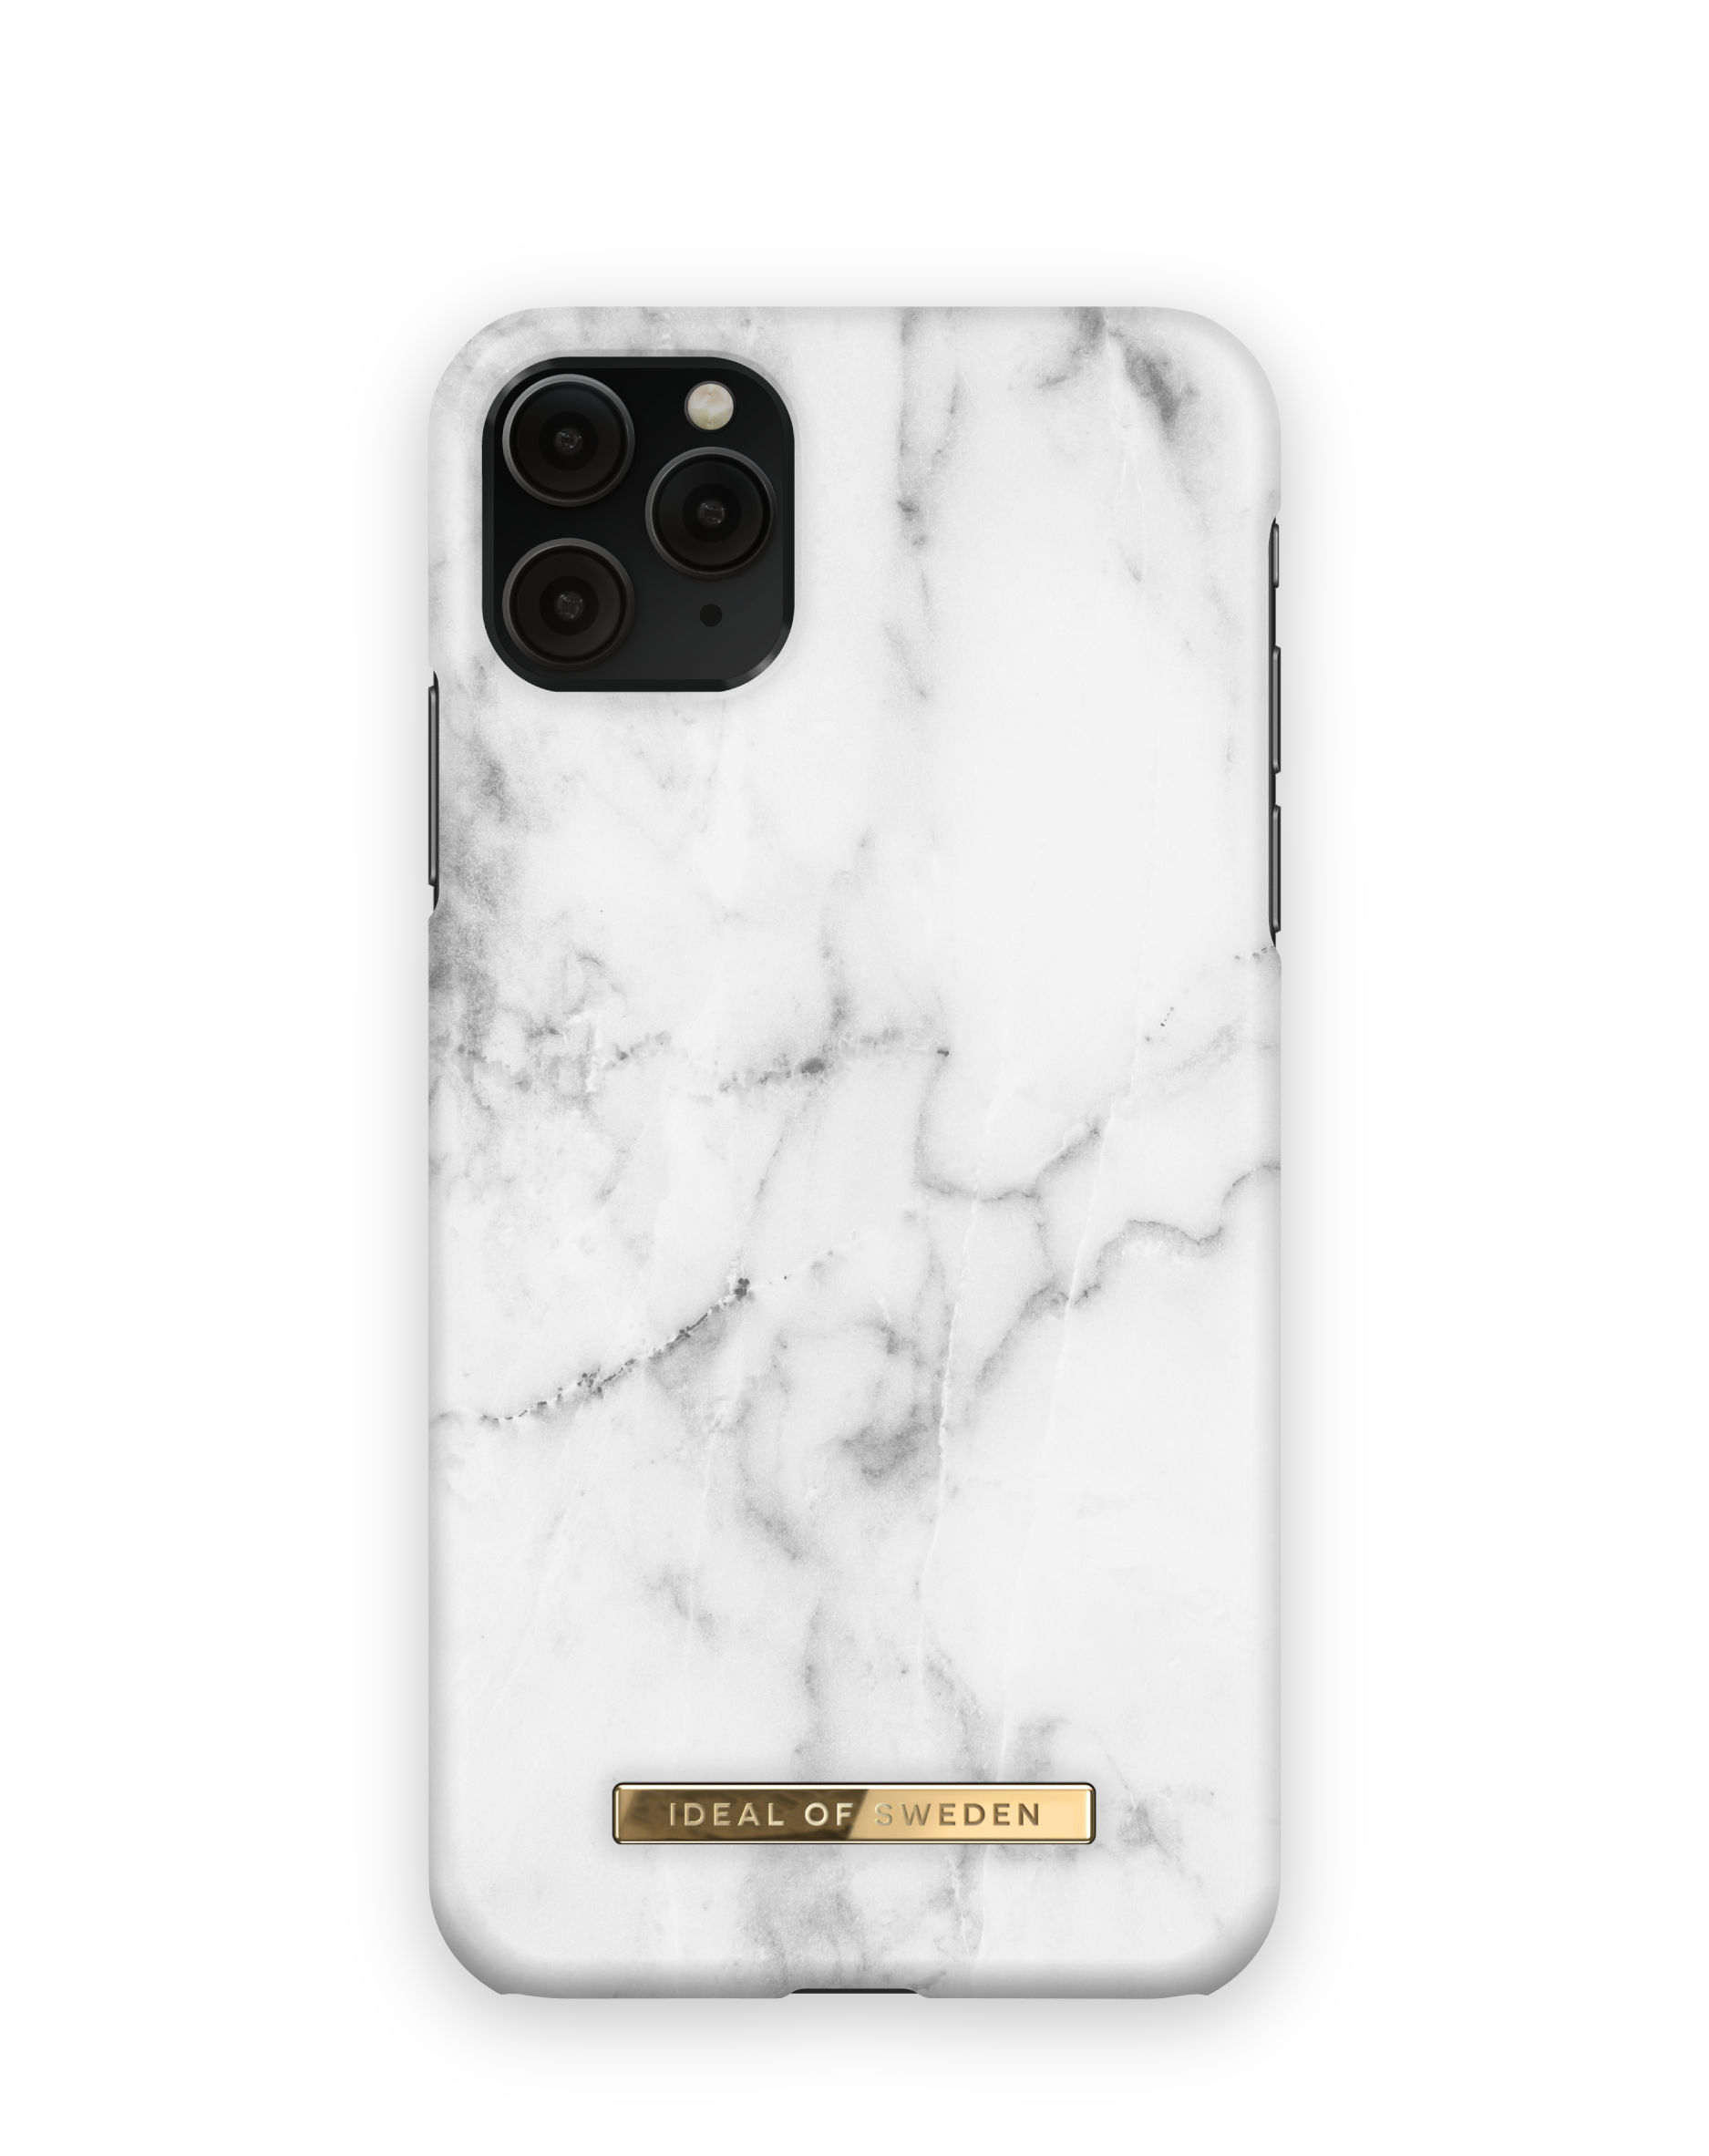 Apple, SWEDEN Apple Backcover, Apple White XS Pro Max, Marble Max, 11 iPhone iPhone OF IDFC-I1965-22, IDEAL